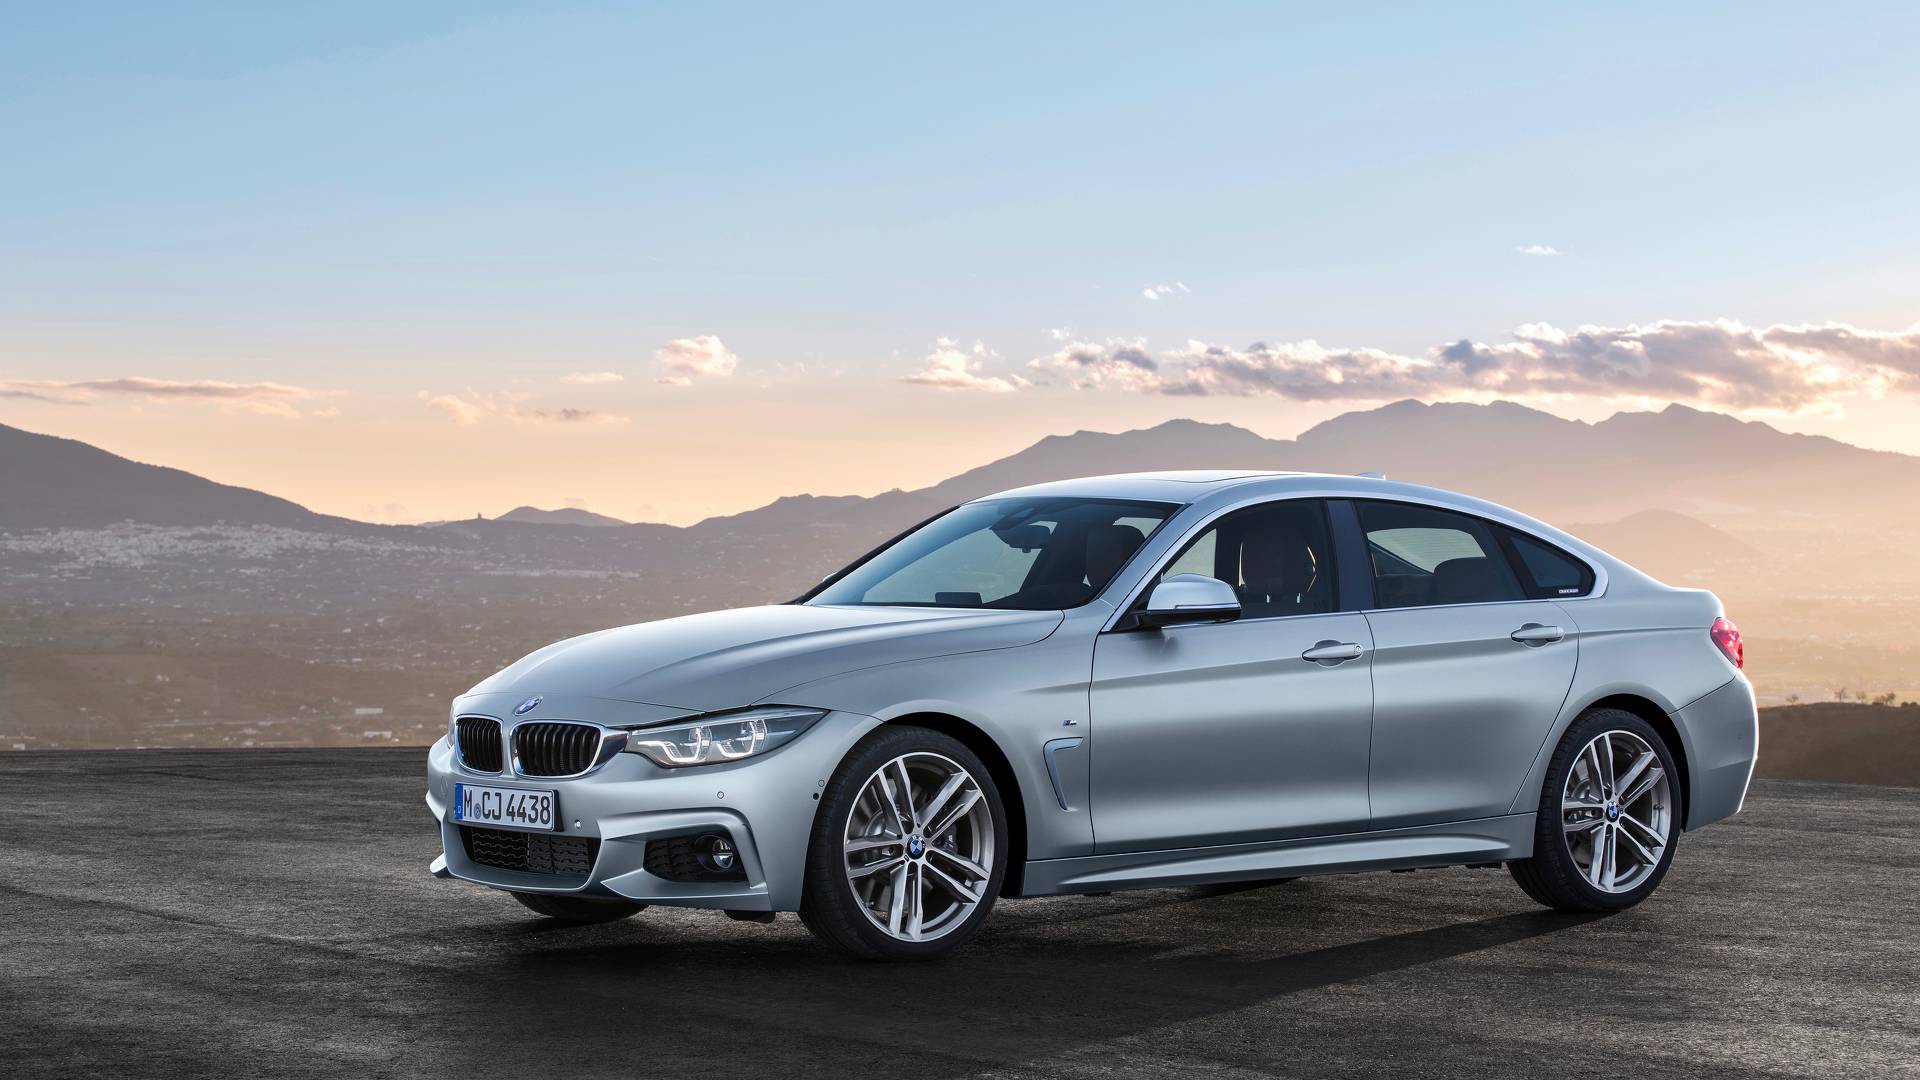 2017 BMW 4 Series Gran Coupe review: Four-door style